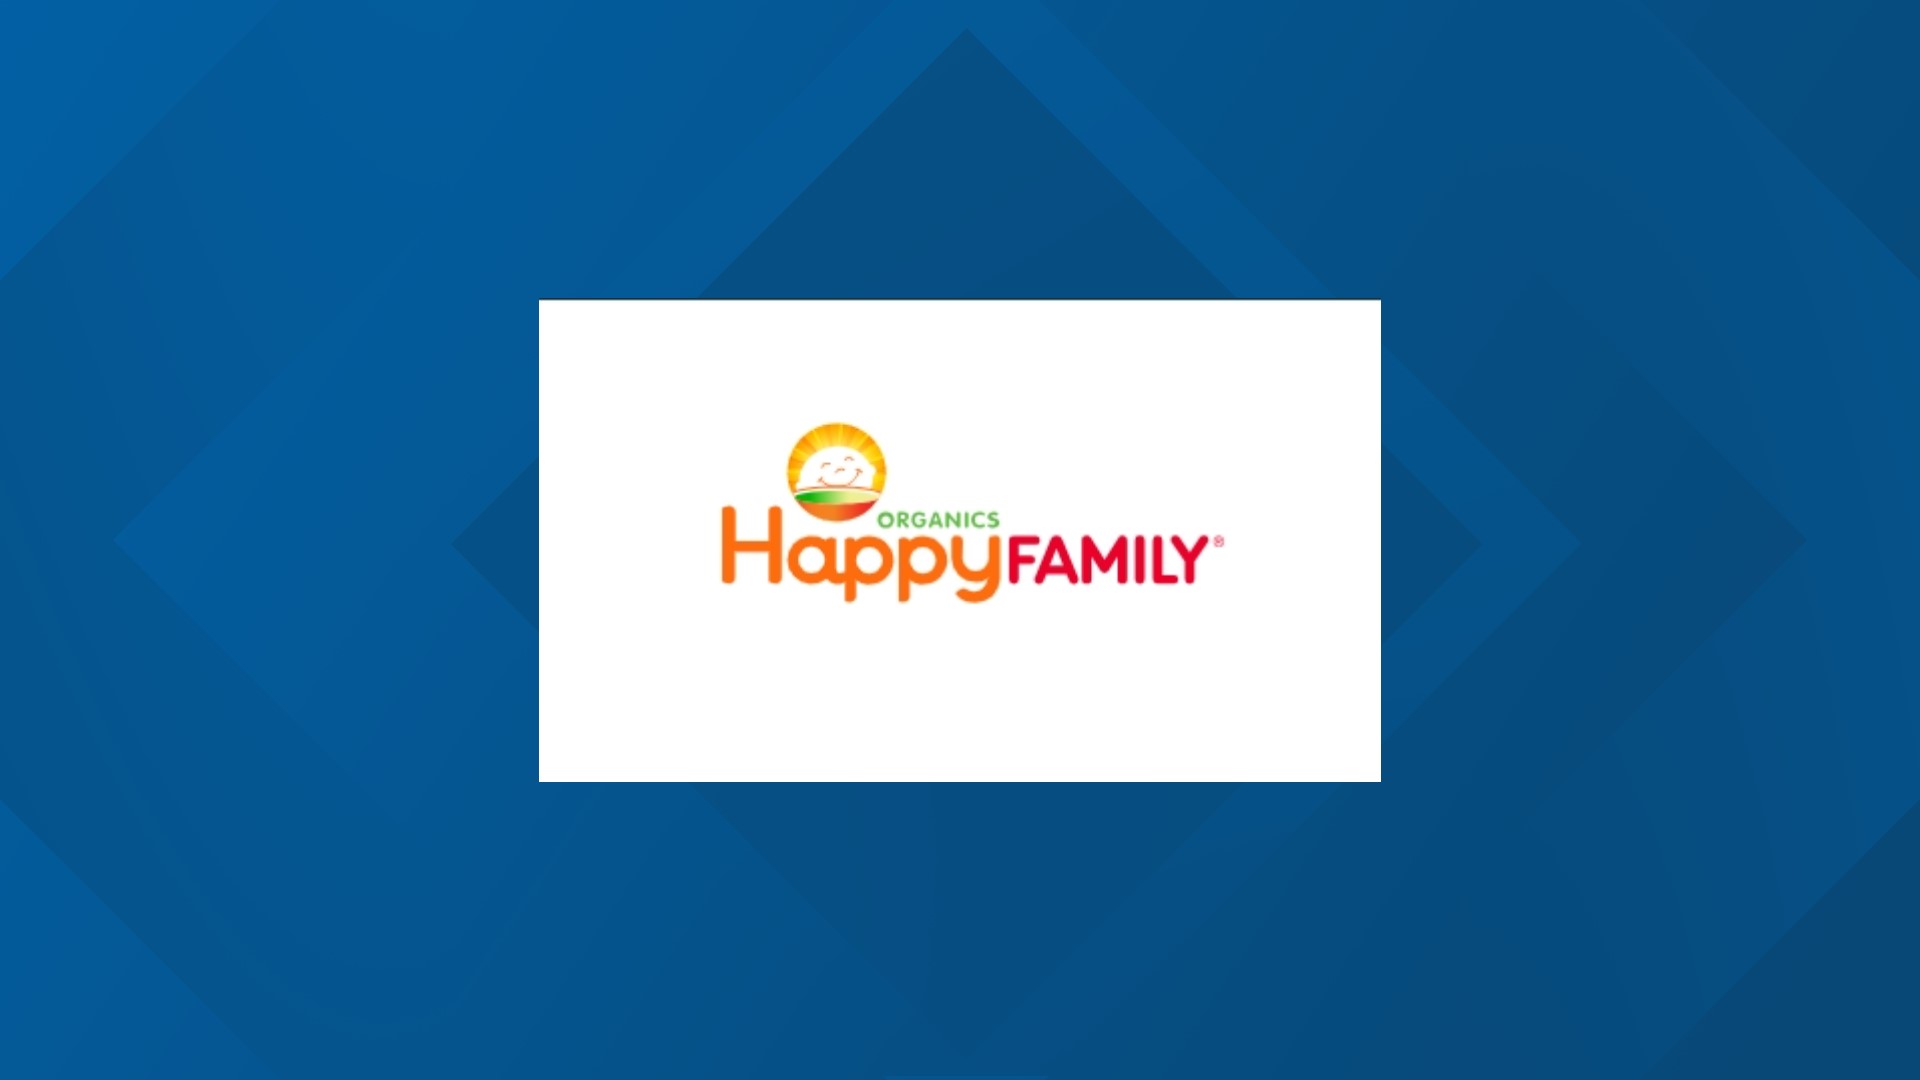 For KTVB's 16th annual 7Cares Idaho Shares campaign, Happy Family Brands is showing support for Idahoans in need as a featured Company that Cares.